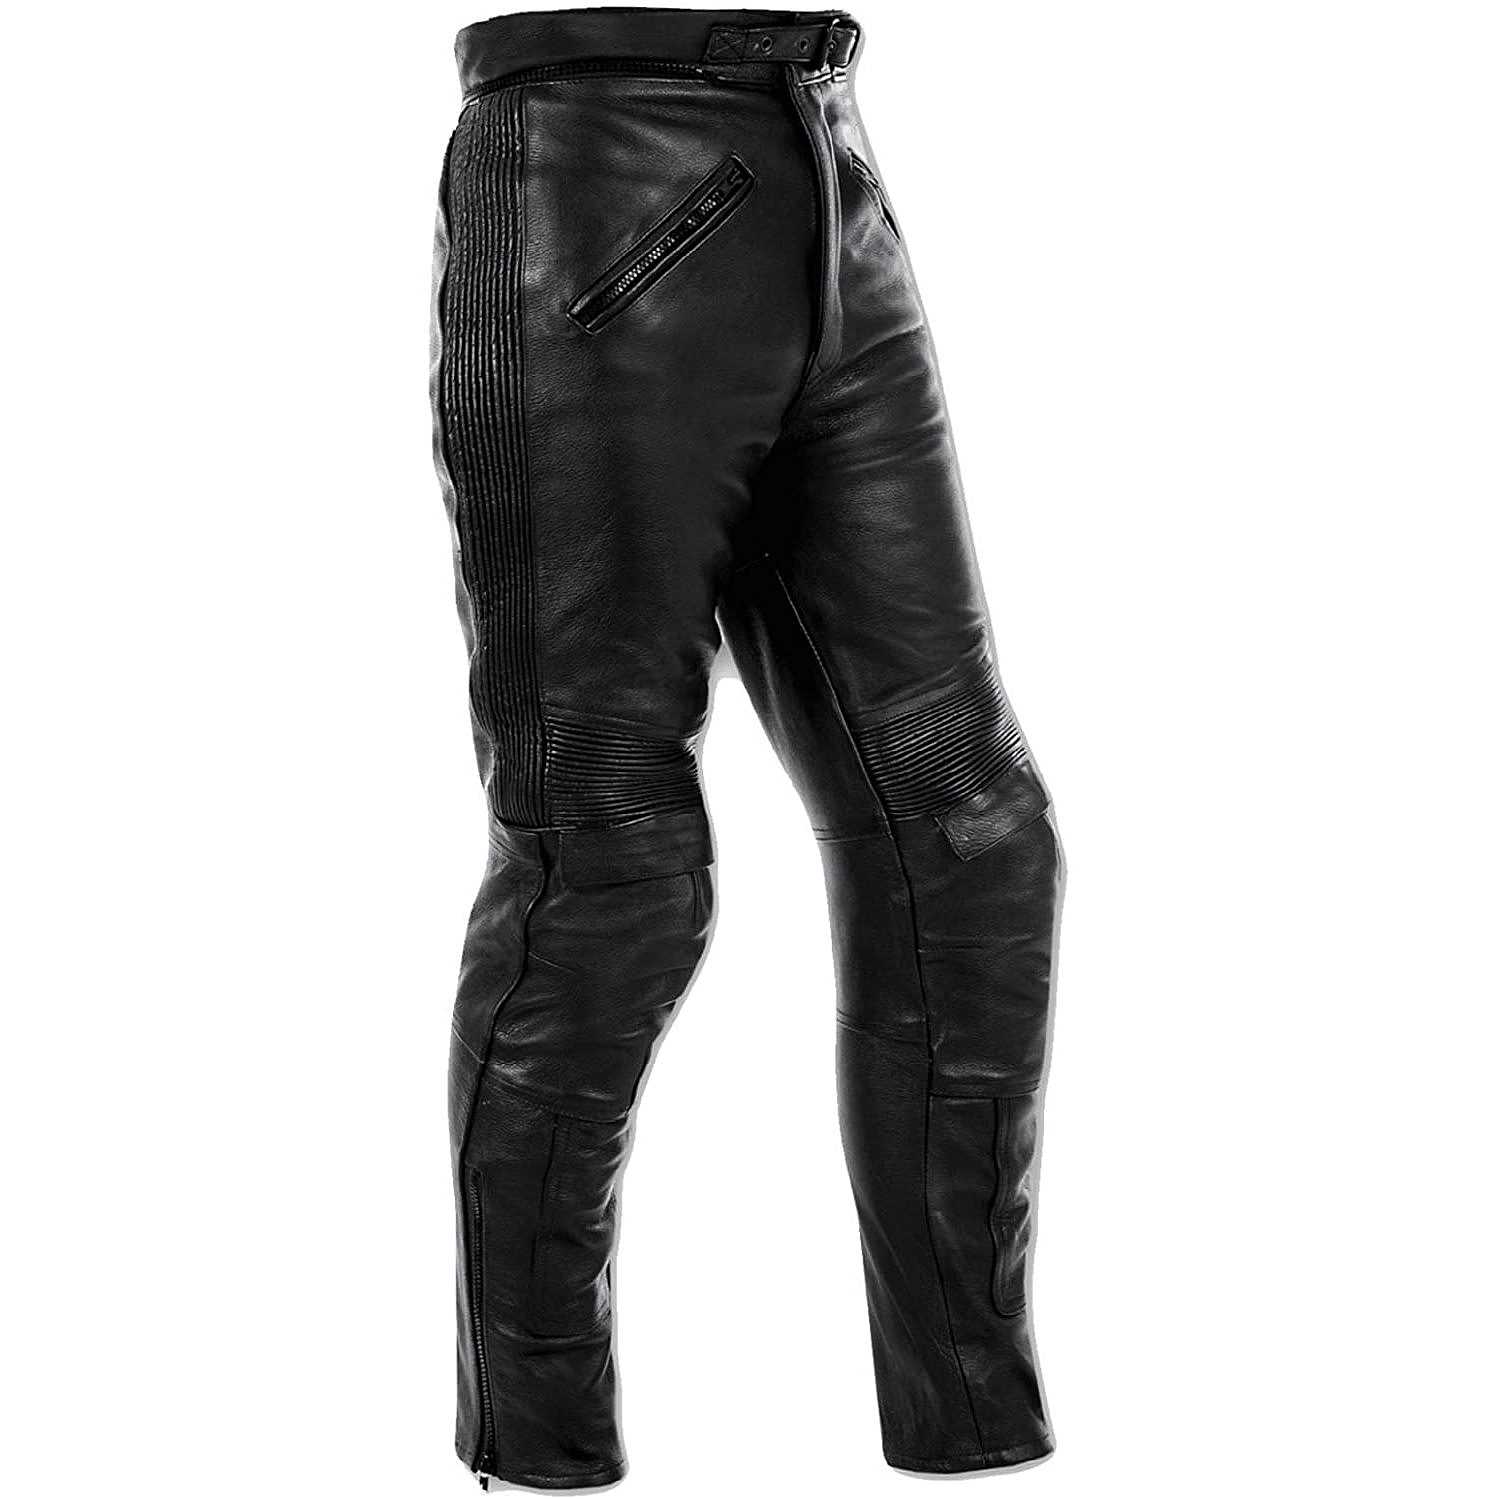 Mens Leather Motorcycle Pants for sale  eBay